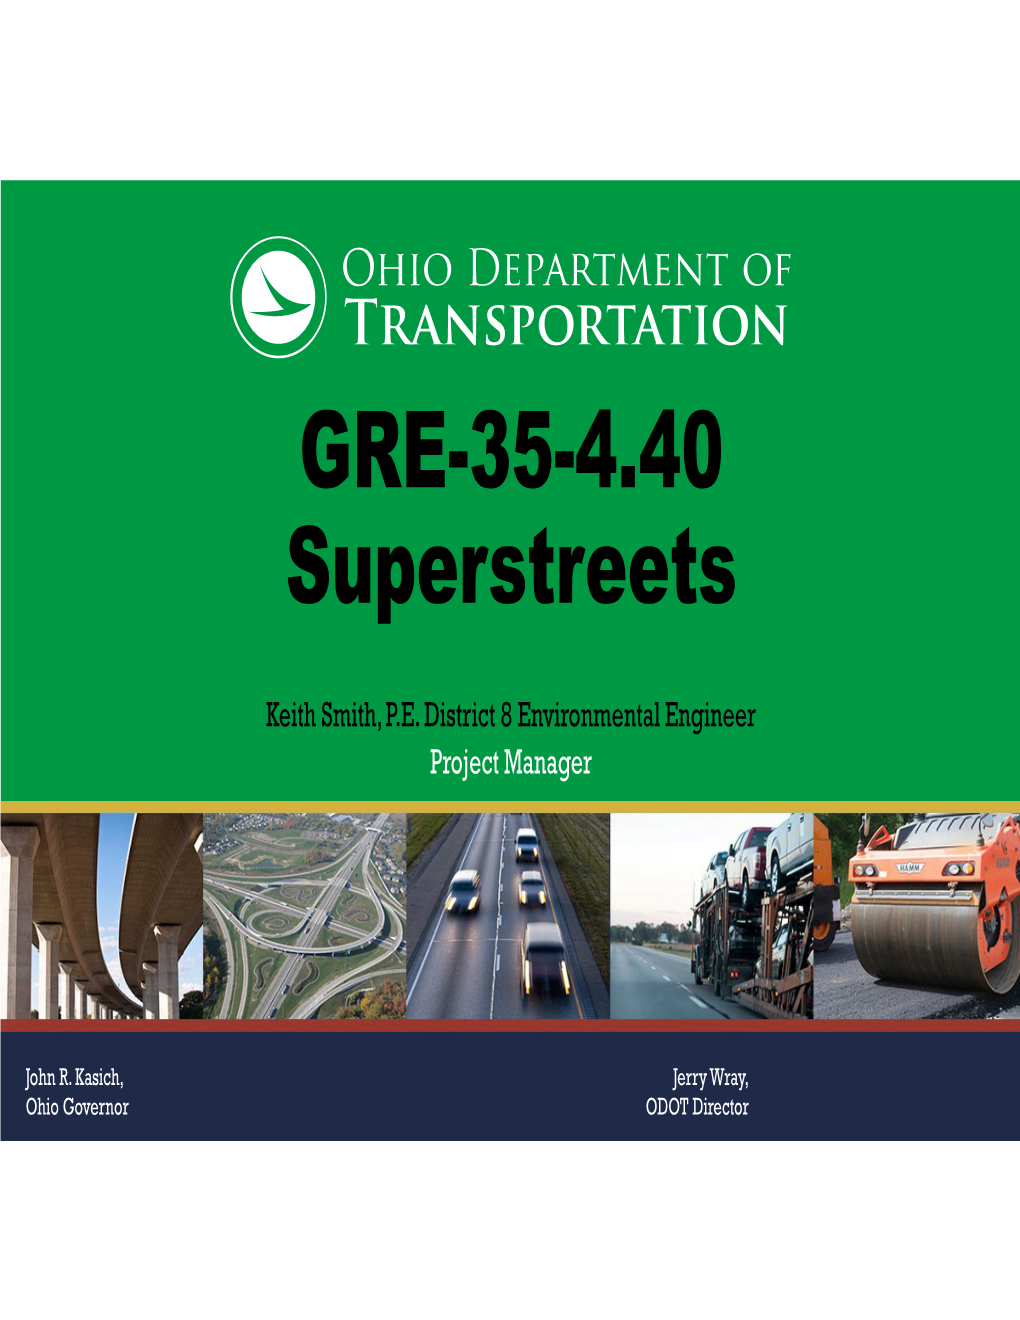 GRE-35-4.40 Superstreets